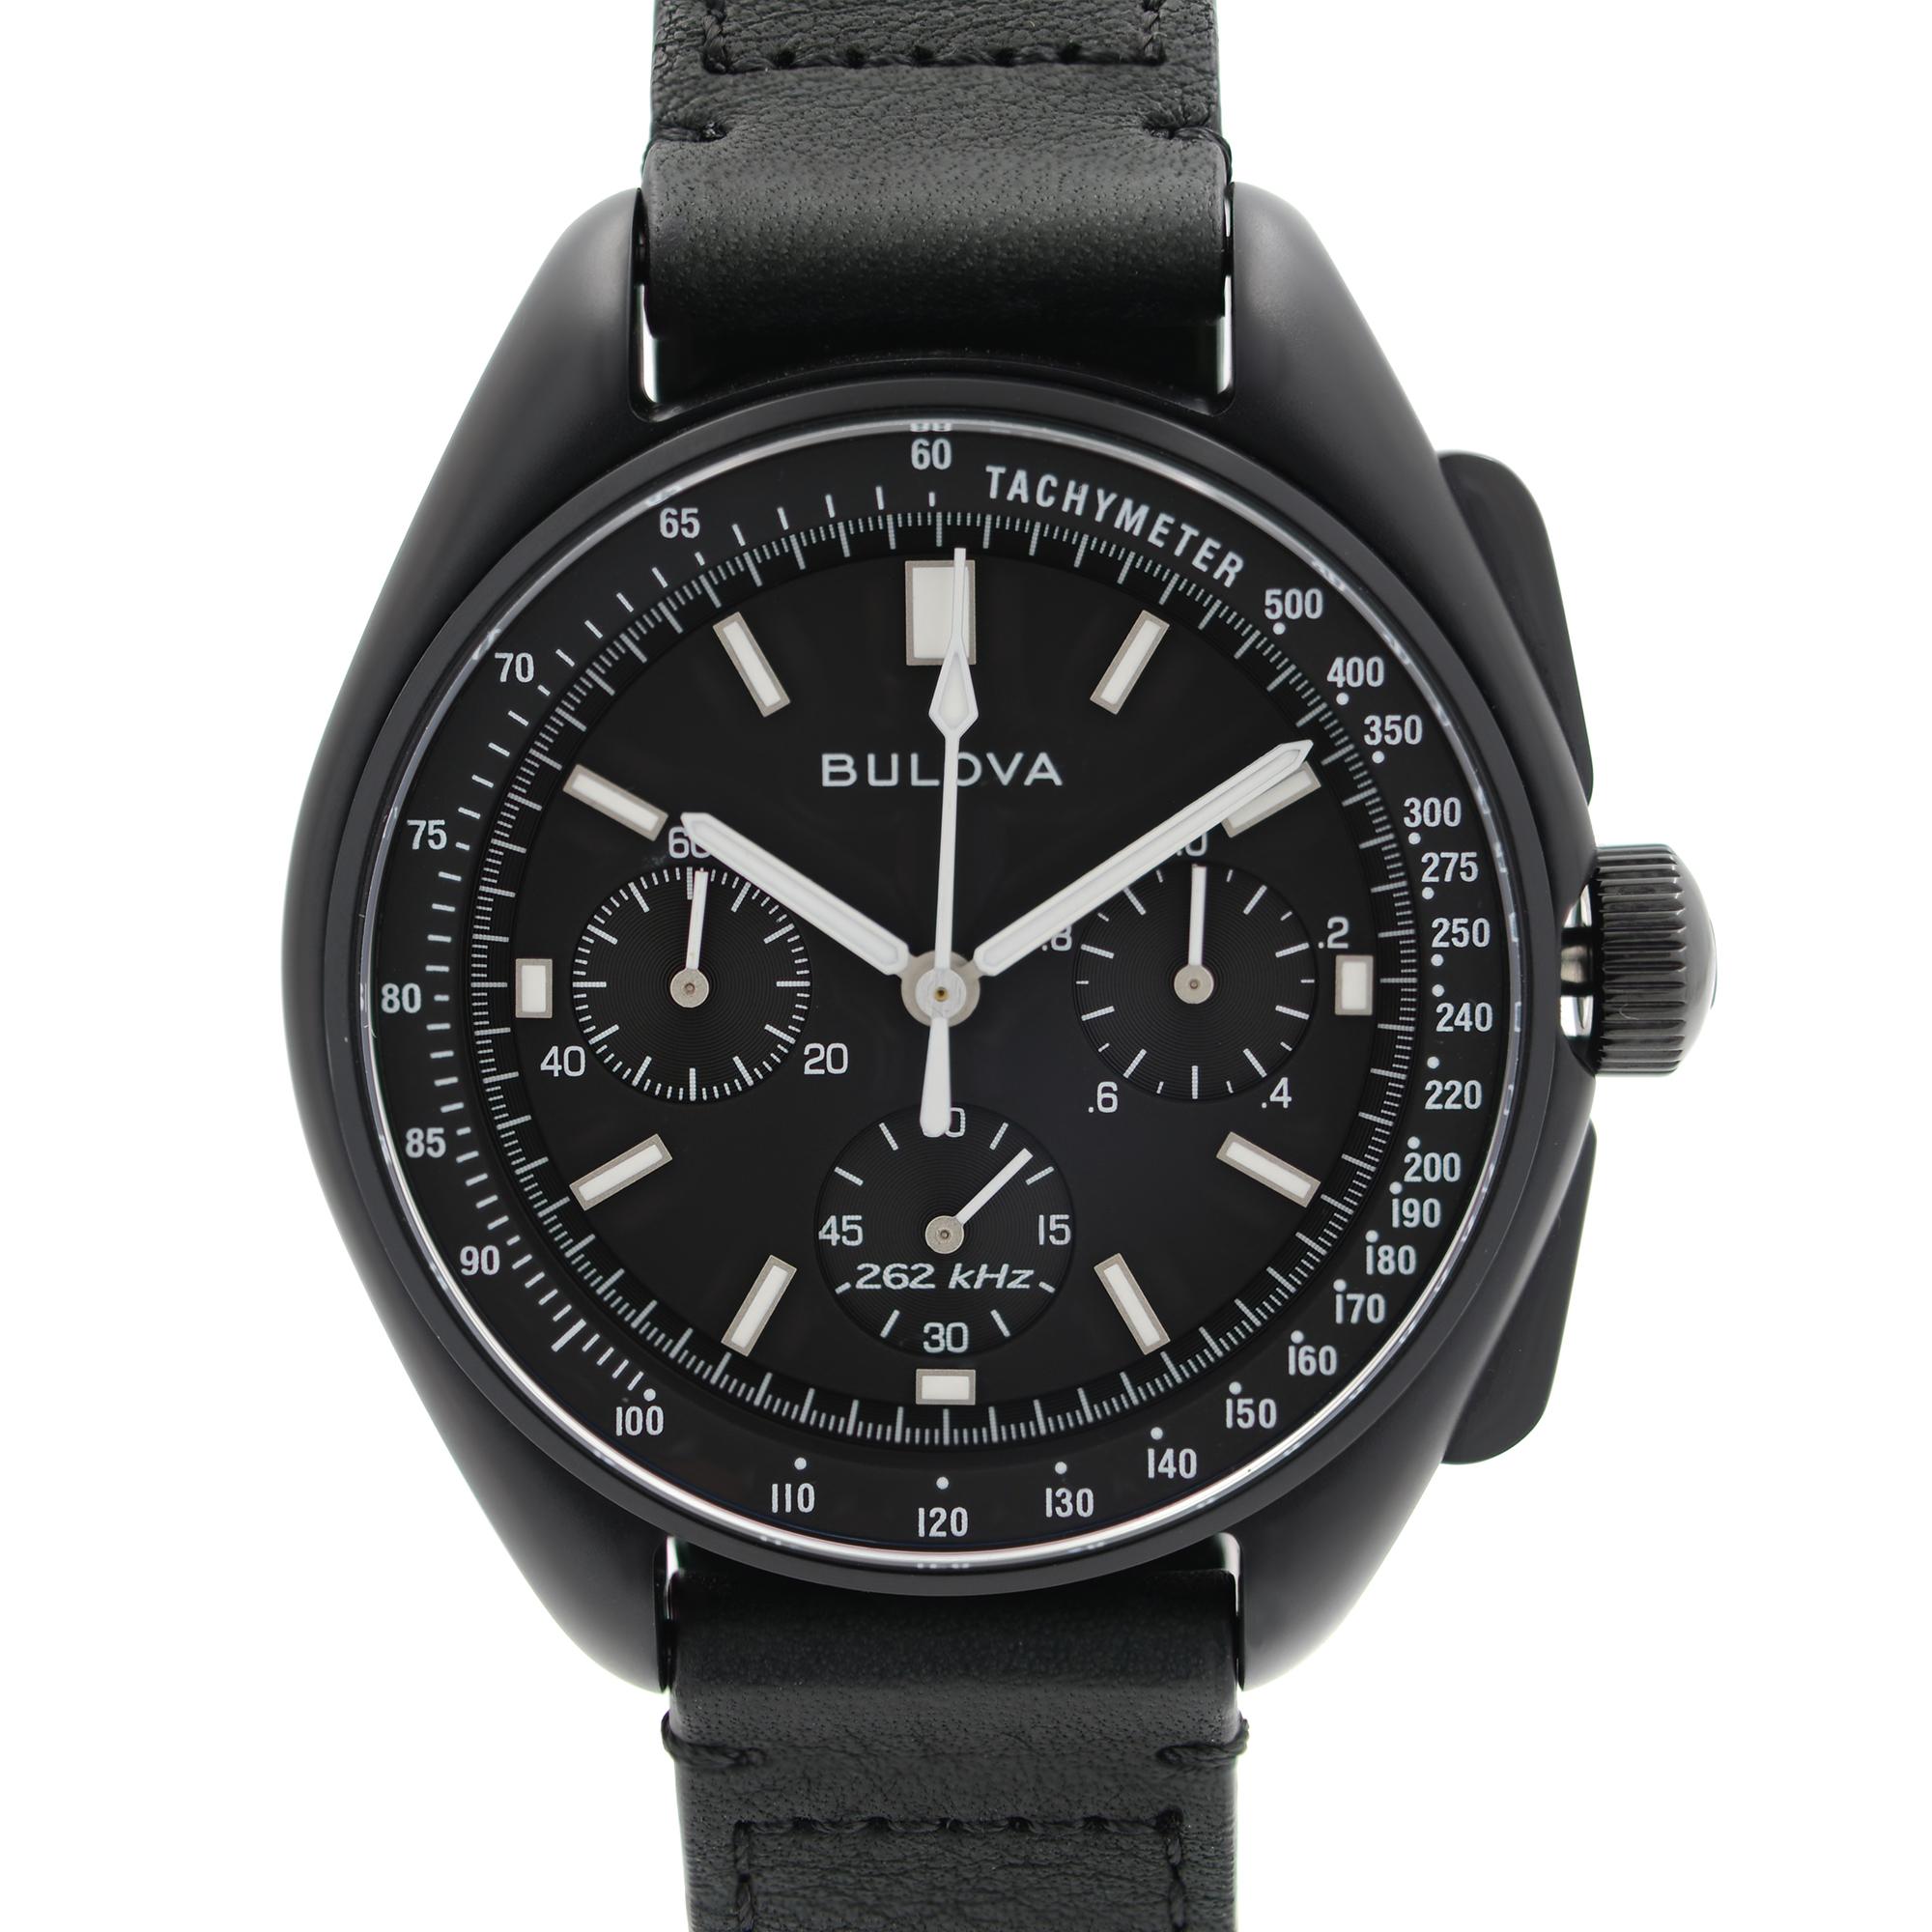 New With Defects Bulova Special Edition Lunar Pilot 45mm Steel Chronograph Black Dial Quartz Men's Watch 98A186. The Band of This Watch is Faded as it Shows in Picture. This Beautiful Timepiece Features: Matte Black Ion-Plated Stainless Steel Case